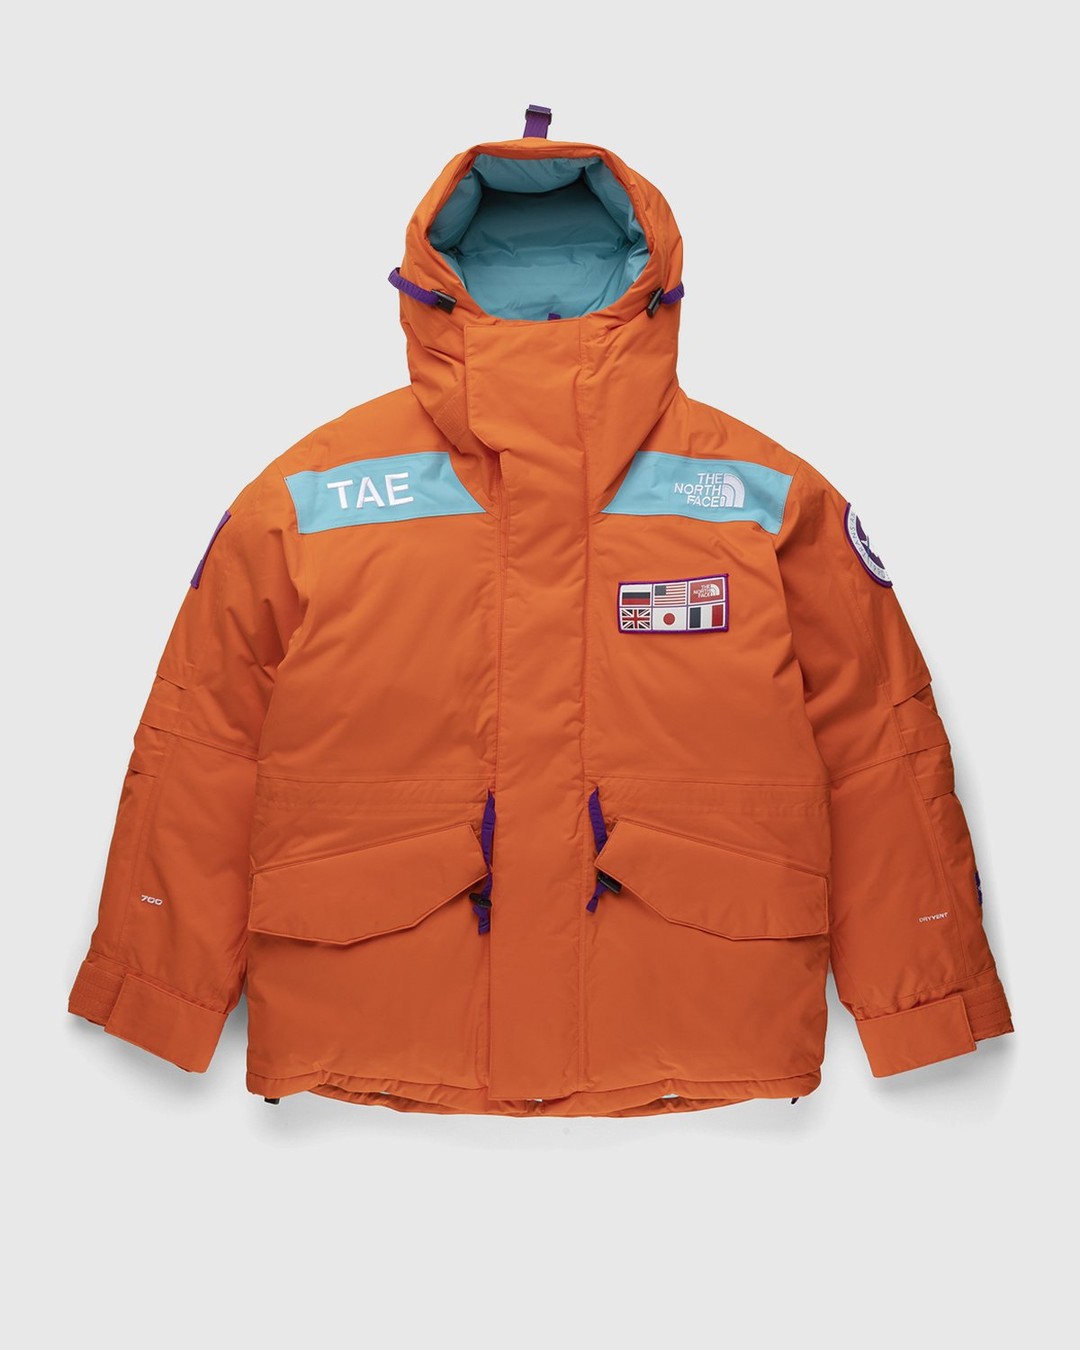 The North Face – Trans Antarctica Expedition Parka Red Orange - Outerwear - Orange - Image 1